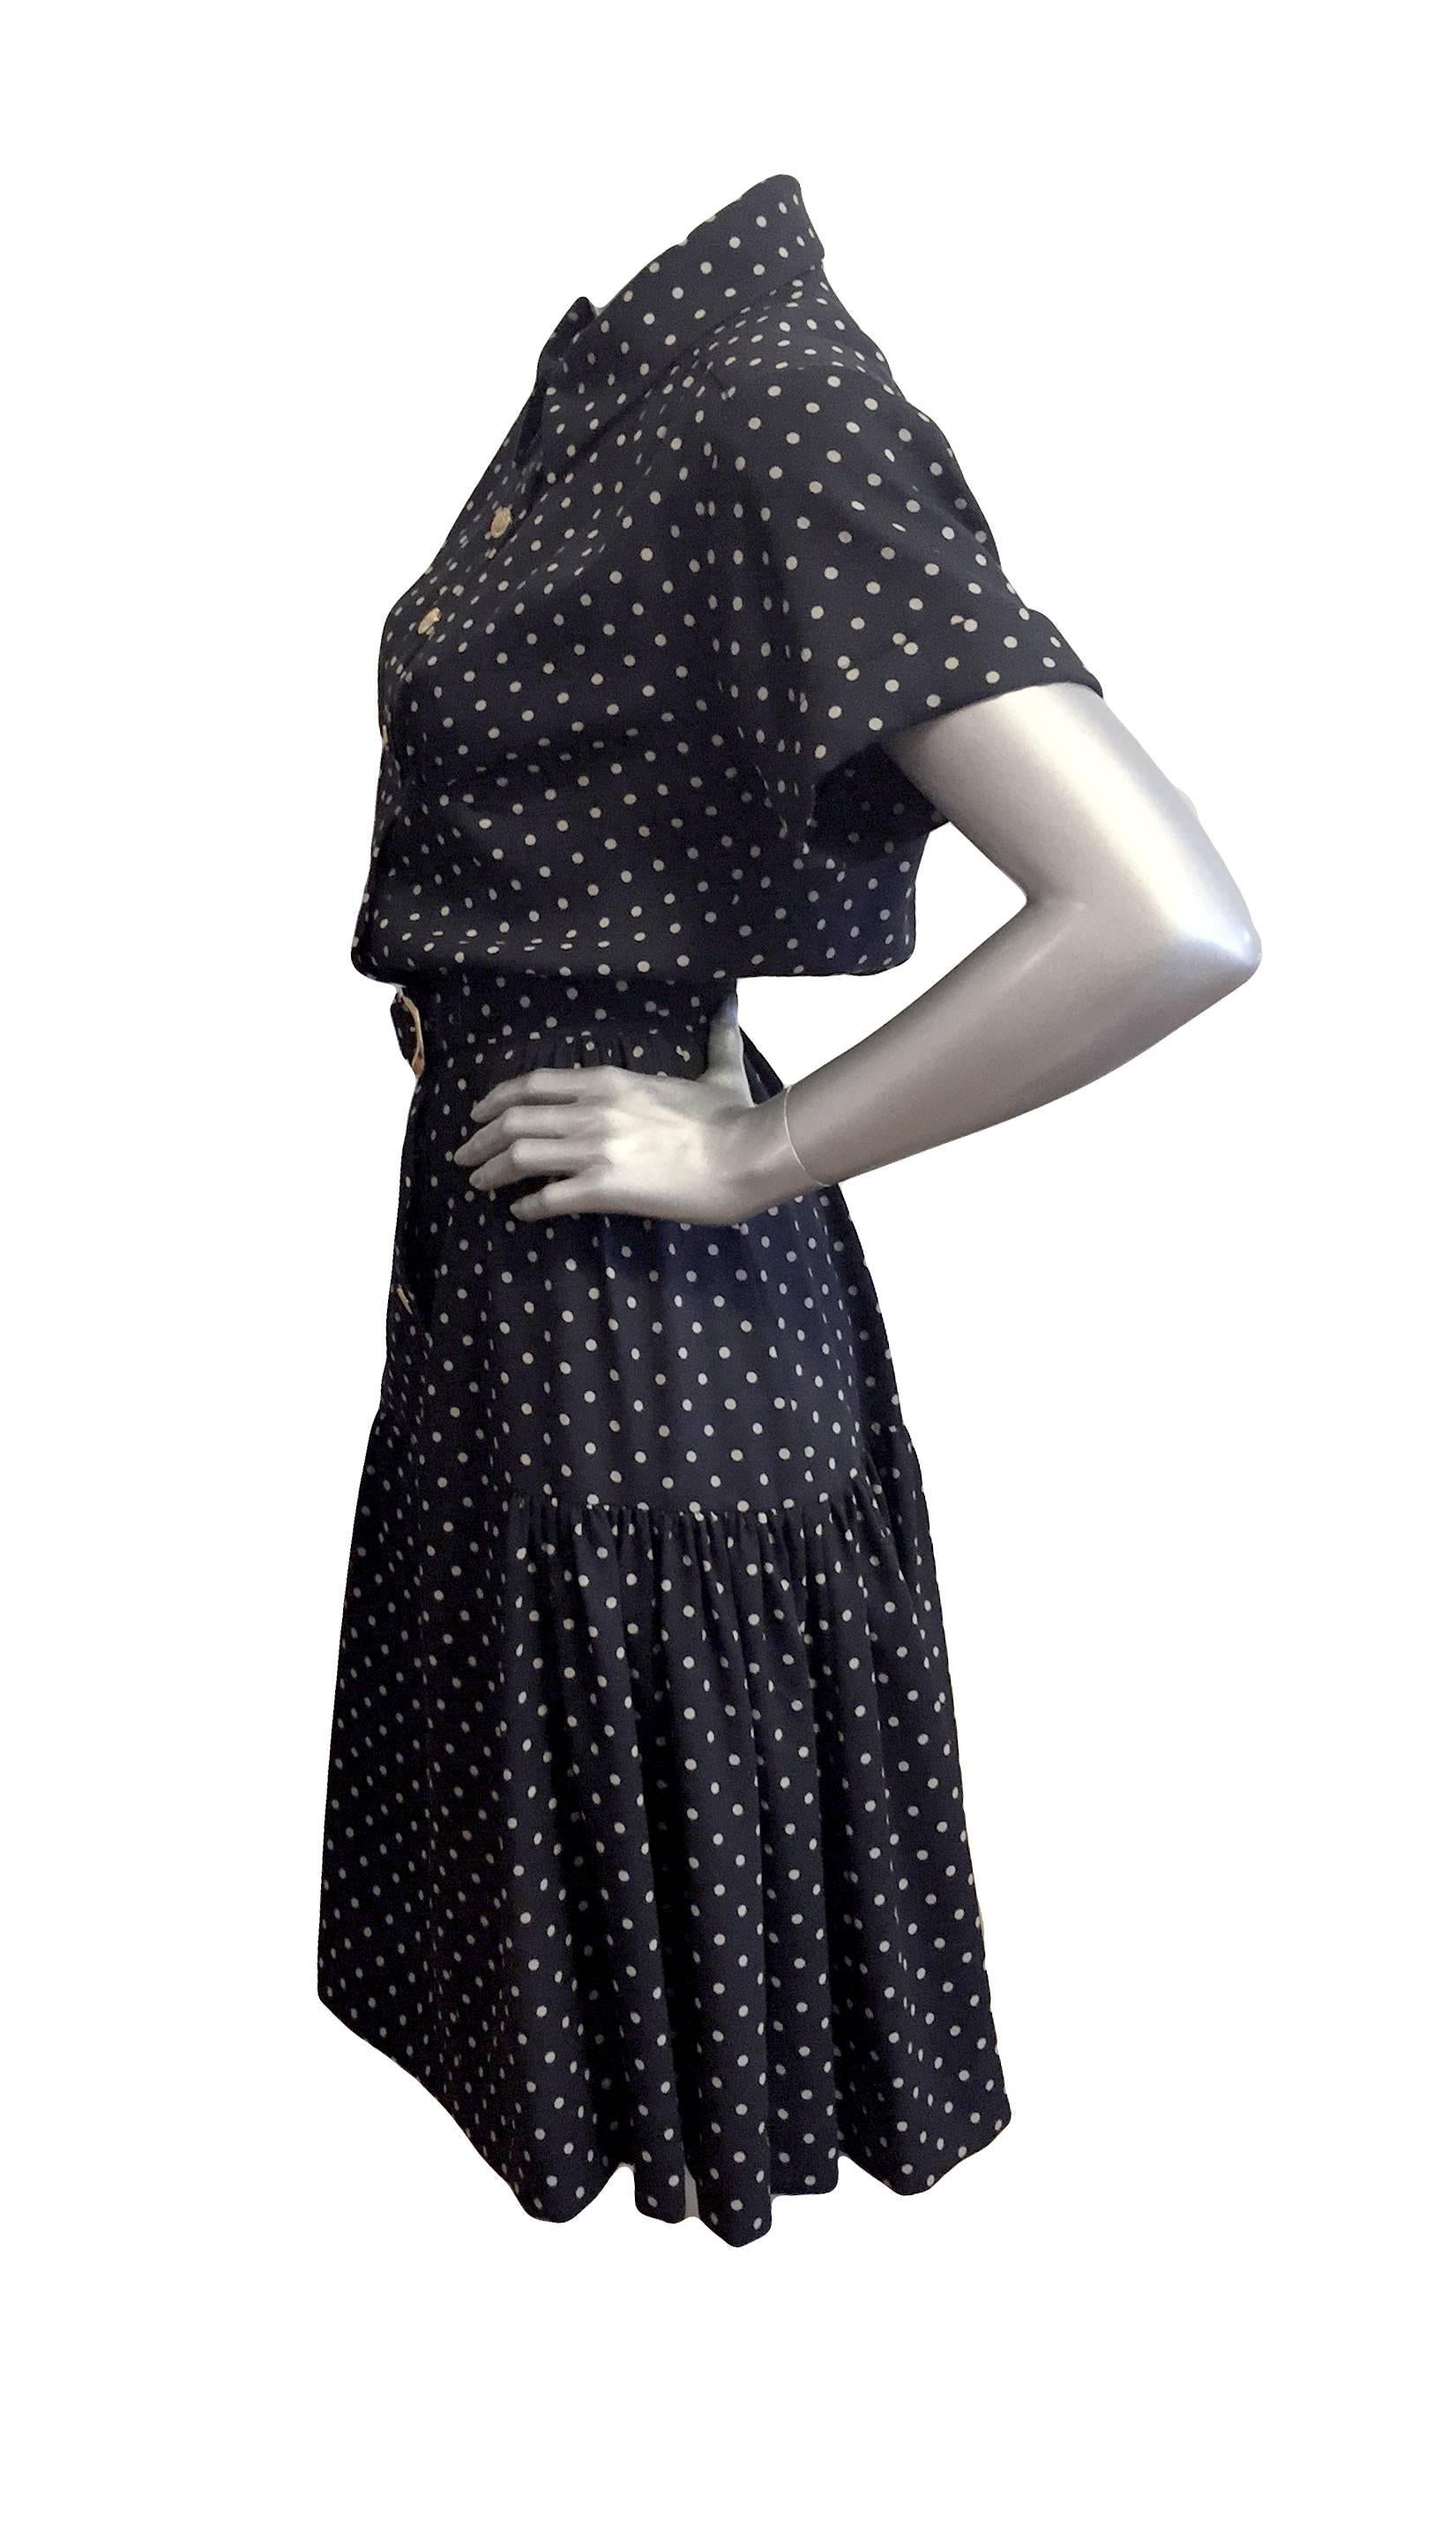 Glam Chanel black dress with ivory dots, gold-tone buttons at front, and accompanying belt, flounce hem, and lightly padded shoulders. Difficult to read the fabric tag, but feels like crepe.

Estimated size US 4

Measurements: Length 46